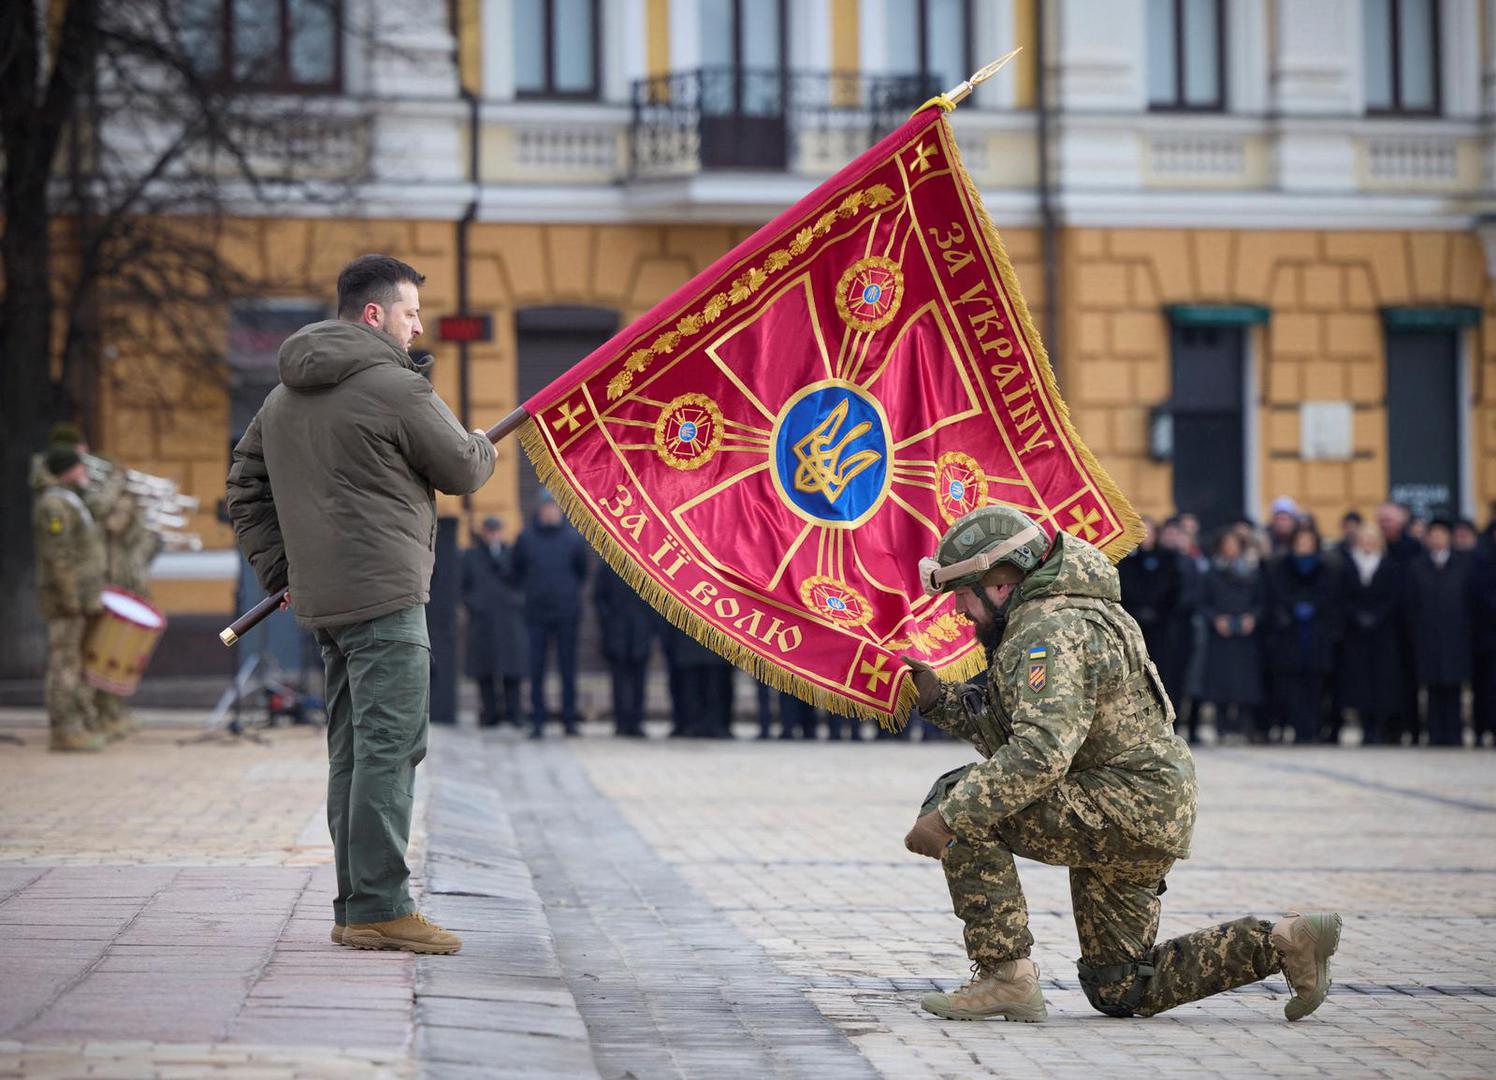 Ukraine's President Volodymyr Zelenskiy handovers a flag to a serviceman during a ceremony dedicated to the first anniversary of the Russian invasion of Ukraine, amid Russia's attack on Ukraine, in Kyiv, Ukraine February 24, 2023. Ukrainian Presidential Press Service/Handout via REUTERS ATTENTION EDITORS - THIS IMAGE HAS BEEN SUPPLIED BY A THIRD PARTY. THIS PICTURE WAS PROCESSED BY REUTERS TO ENHANCE QUALITY. AN UNPROCESSED VERSION HAS BEEN PROVIDED SEPARATELY. Photo: Ukrainian Presidential Press Ser/REUTERS